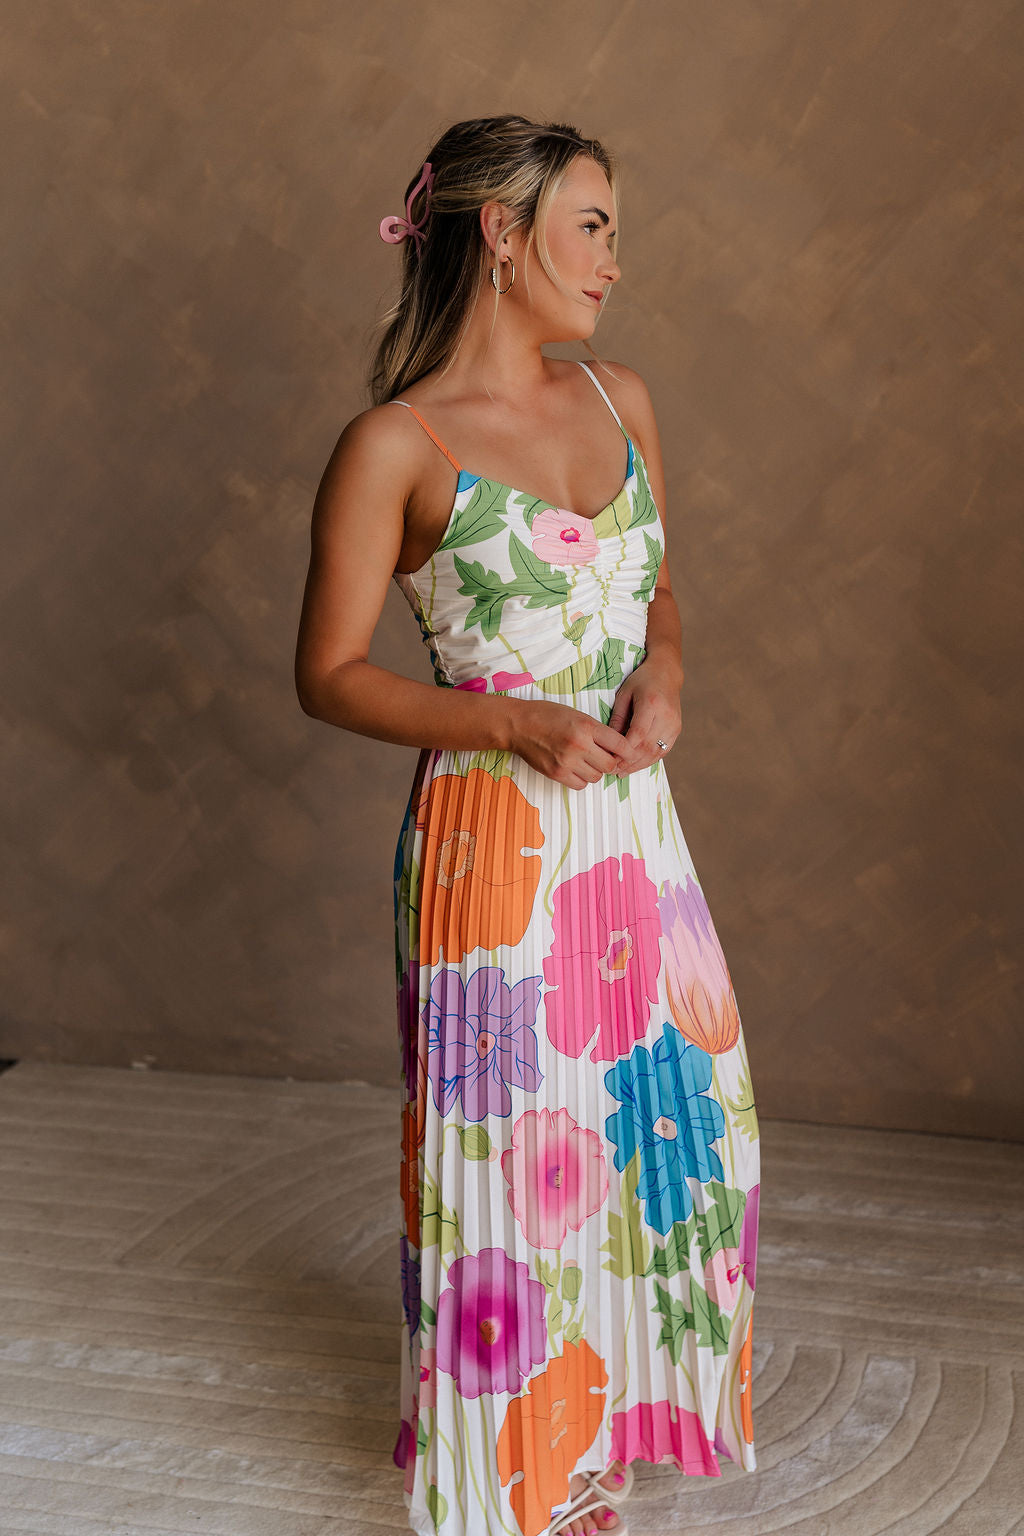 Full body side view of model wearing the Alia Pleated Floral Maxi Dress that has multi-colored fabric with a floral print, pleating, thin straps, and a sweetheart neck. Model is holding skirt.